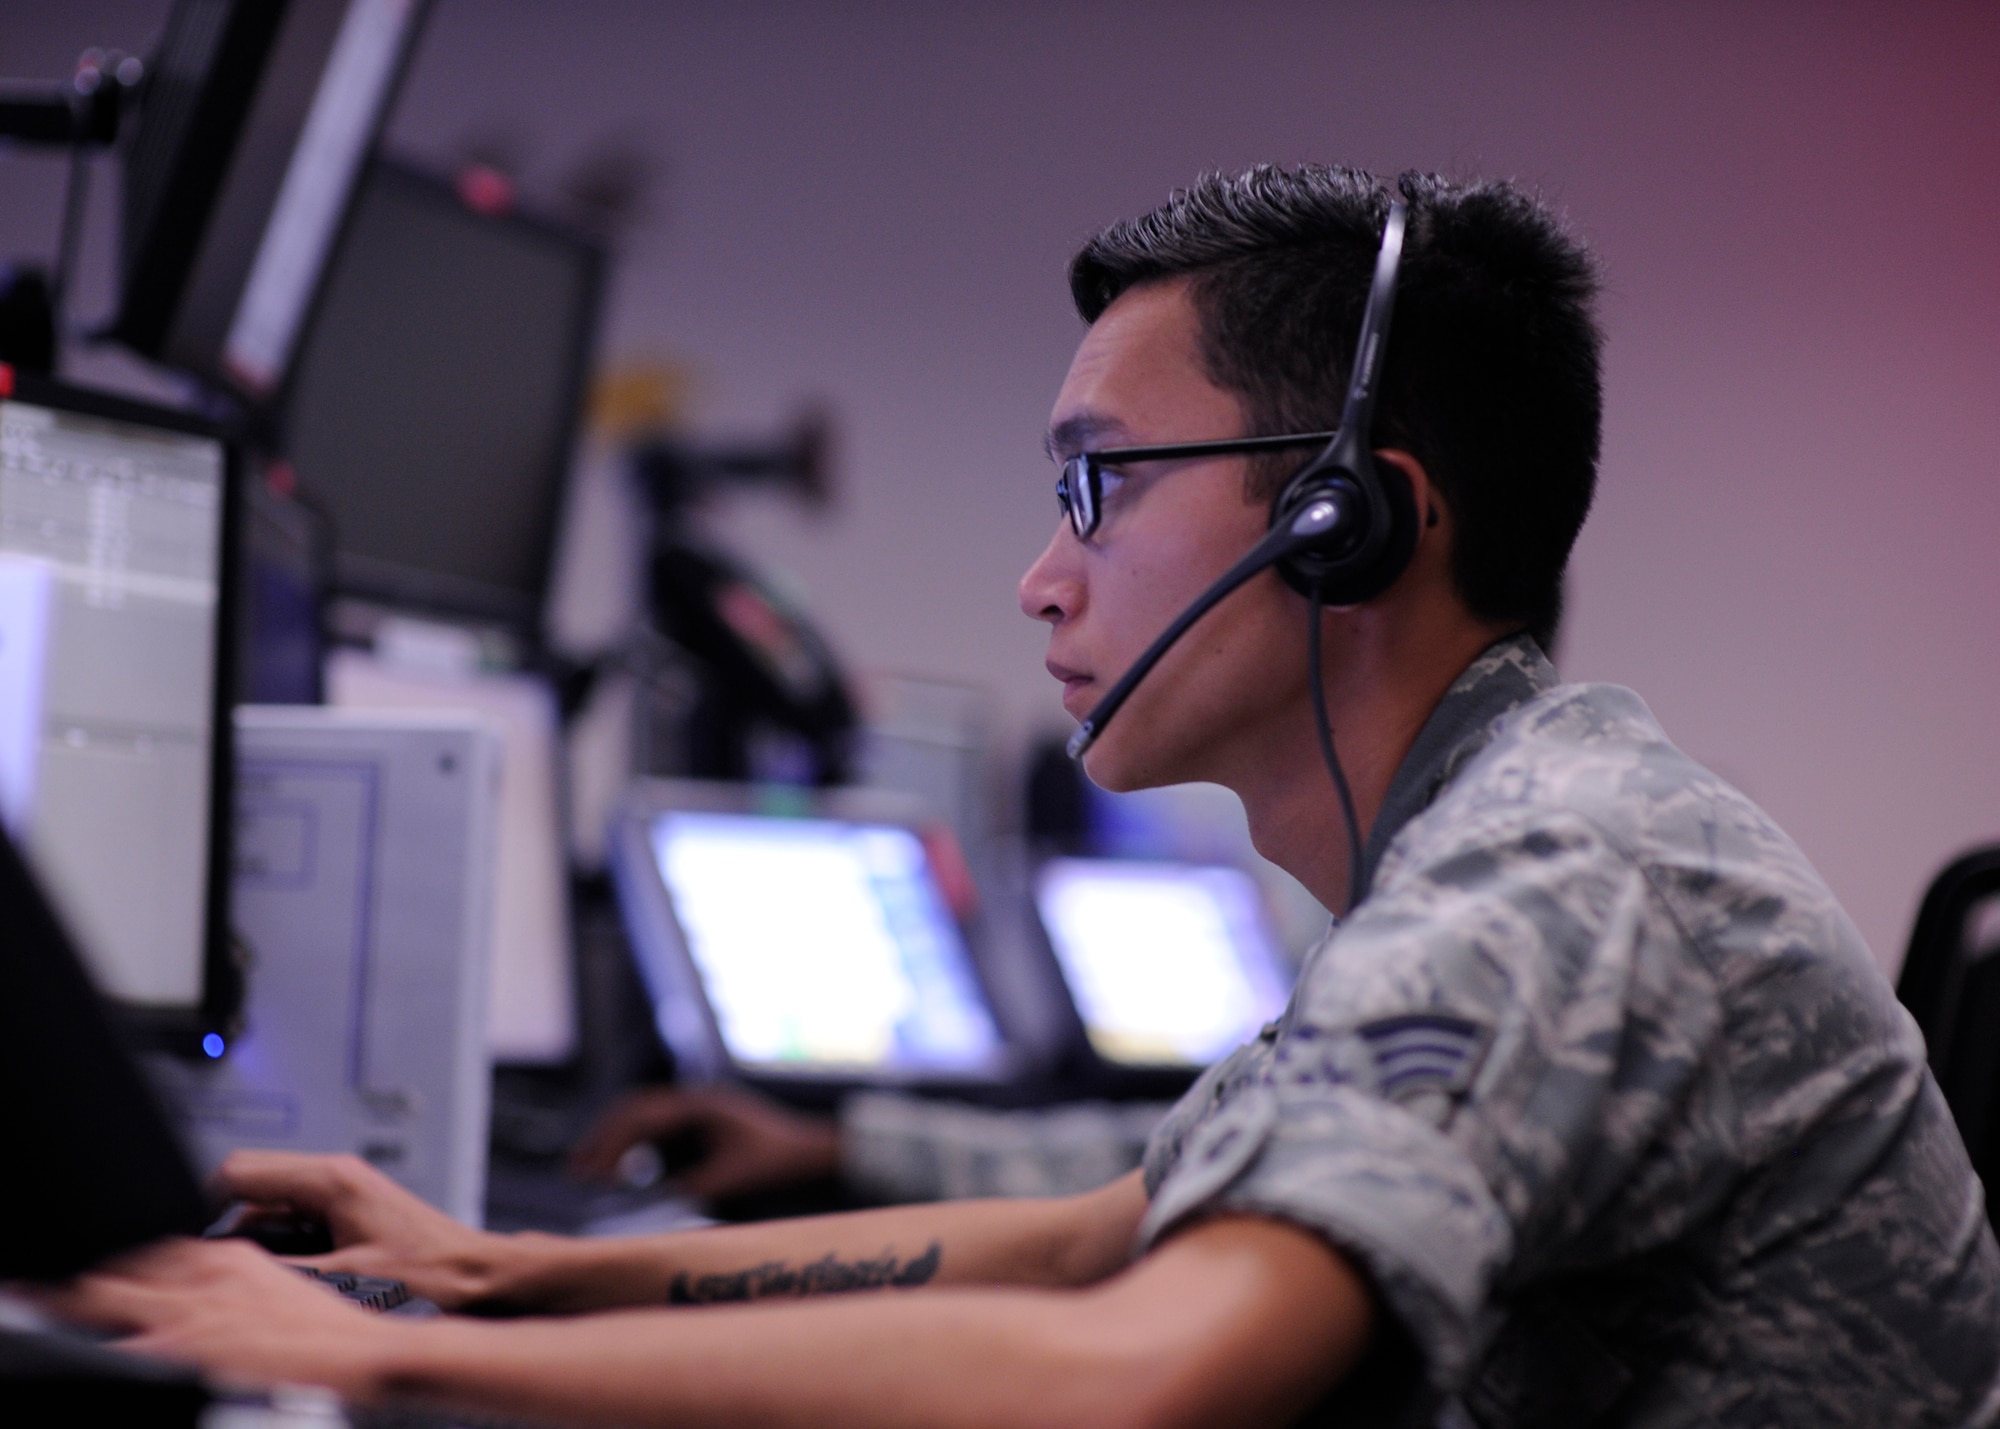 Senior Airman Dakota Rimbach from the 81st Range Control Squadron runs a command and control mission at the 81st RCS, Tyndall Air Force Base, Fla., July 26,2016. The 81st RCS provides command and control in support of the 53rd Weapons Evaluation Group mission. (U.S. Air Force photo by Senior Airman Solomon Cook/Released)